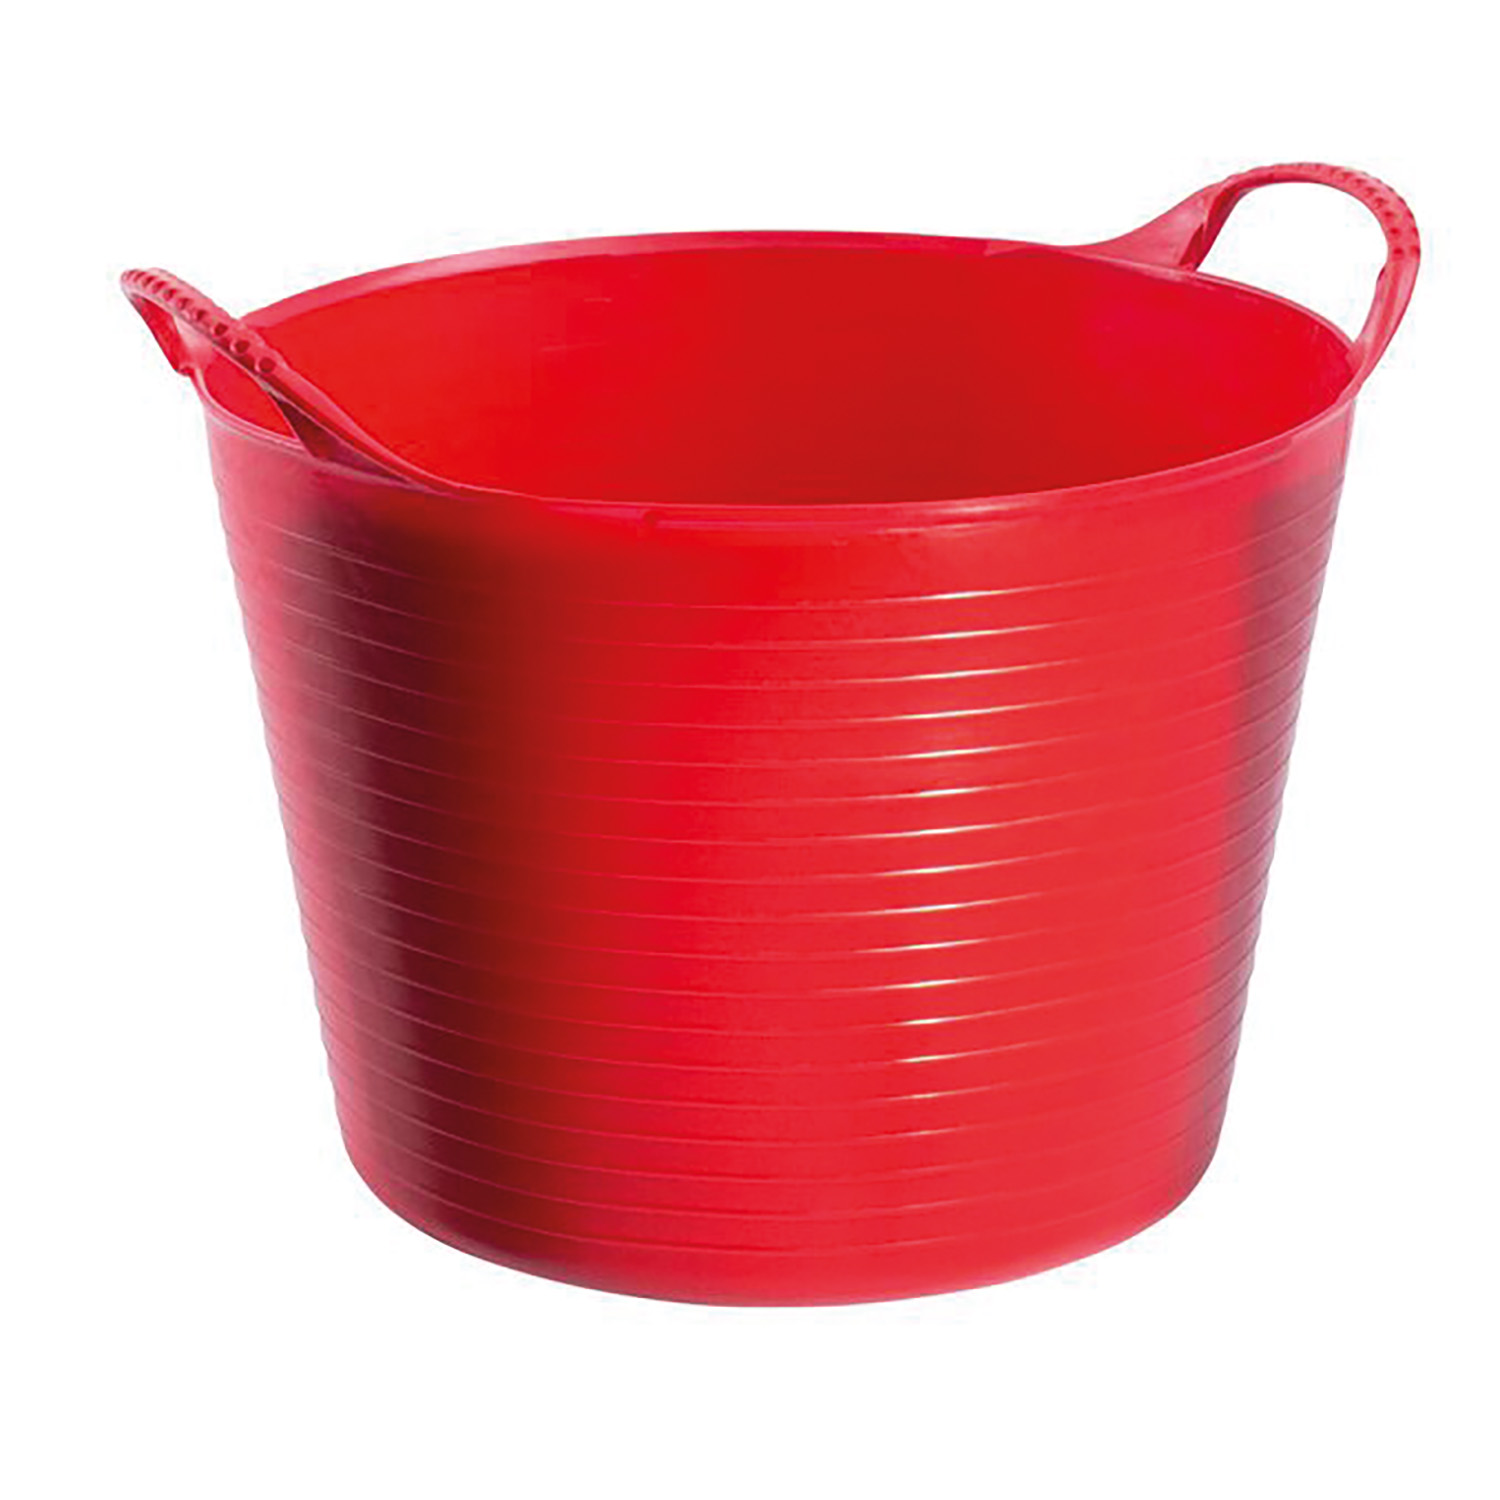 RED GORILLA TUBTRUG FLEXIBLE SMALL RED SMALL (14LT)